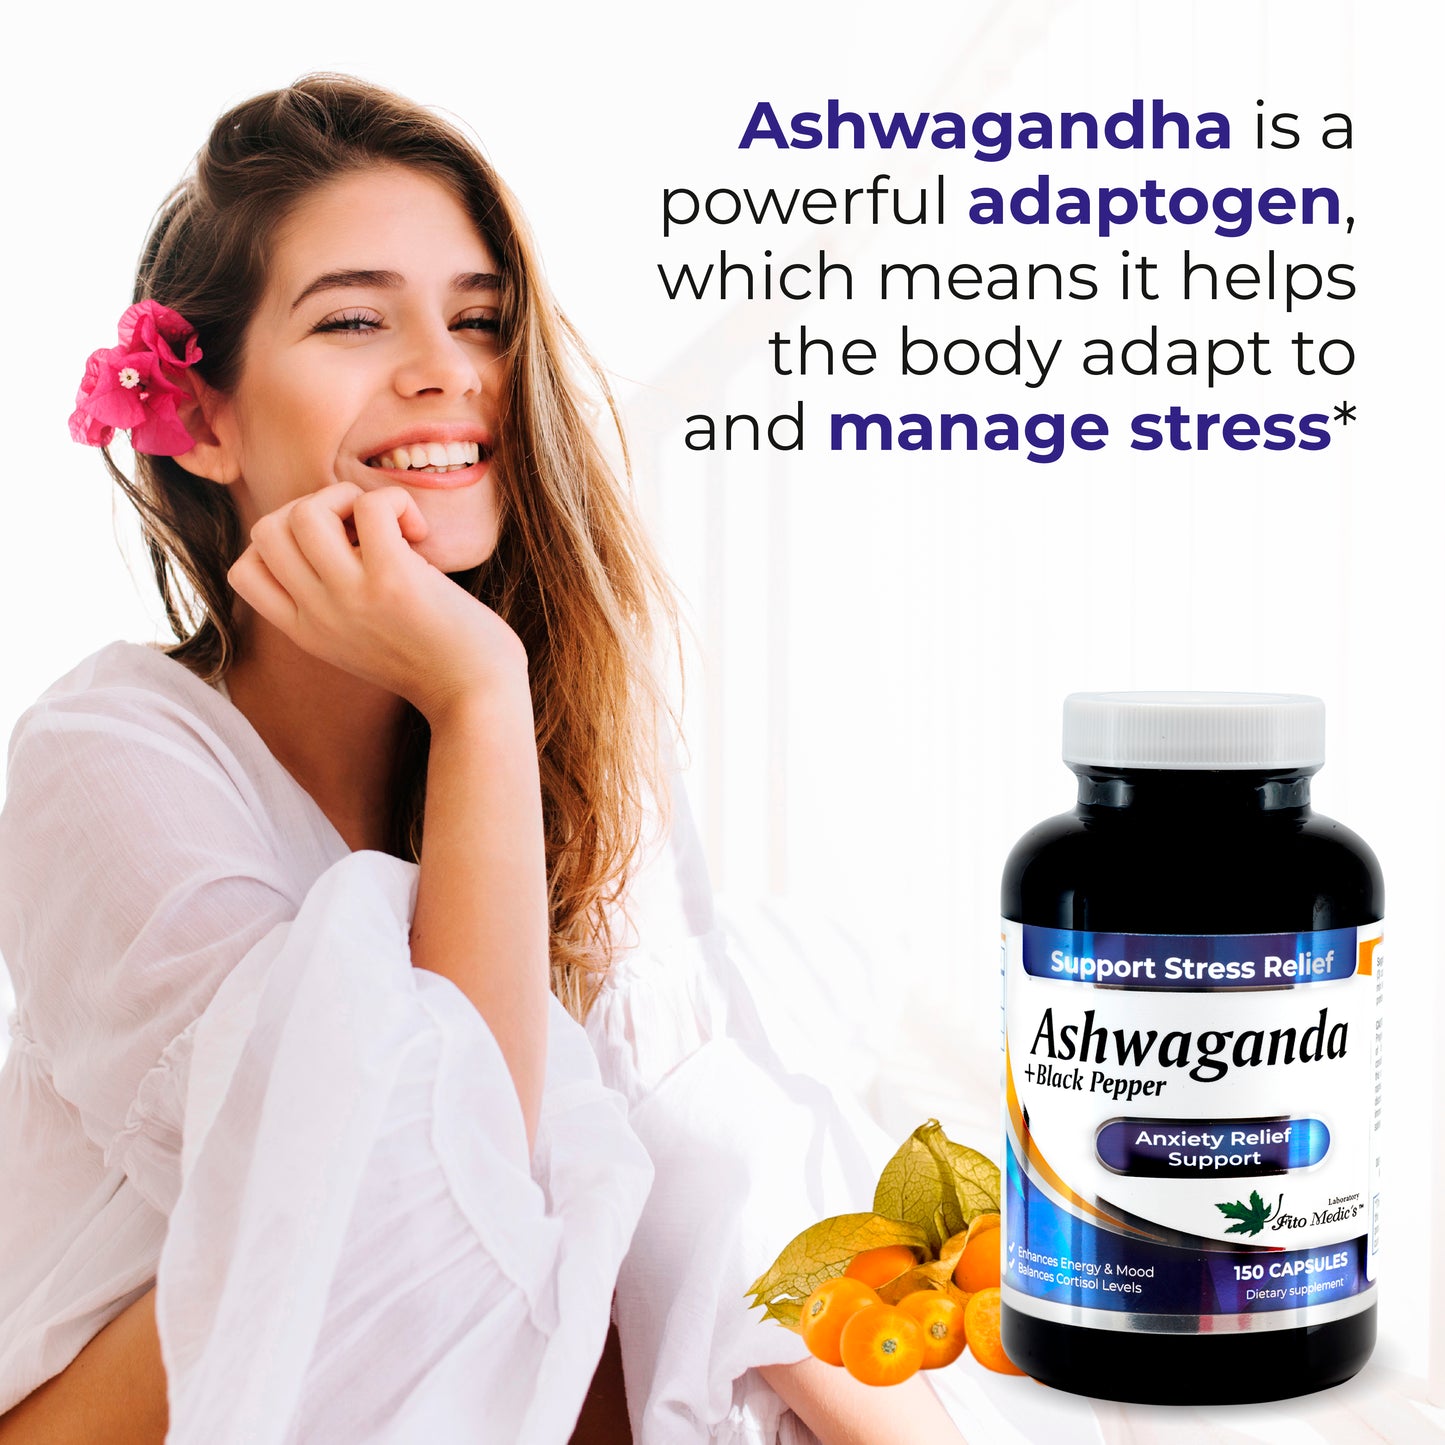 Ashwagandha Fito Medic´s - 150 Caps -Thyroid Support, Joints, Adaptogens- Helps Support a Healthy Response to Stress, The Immune System.